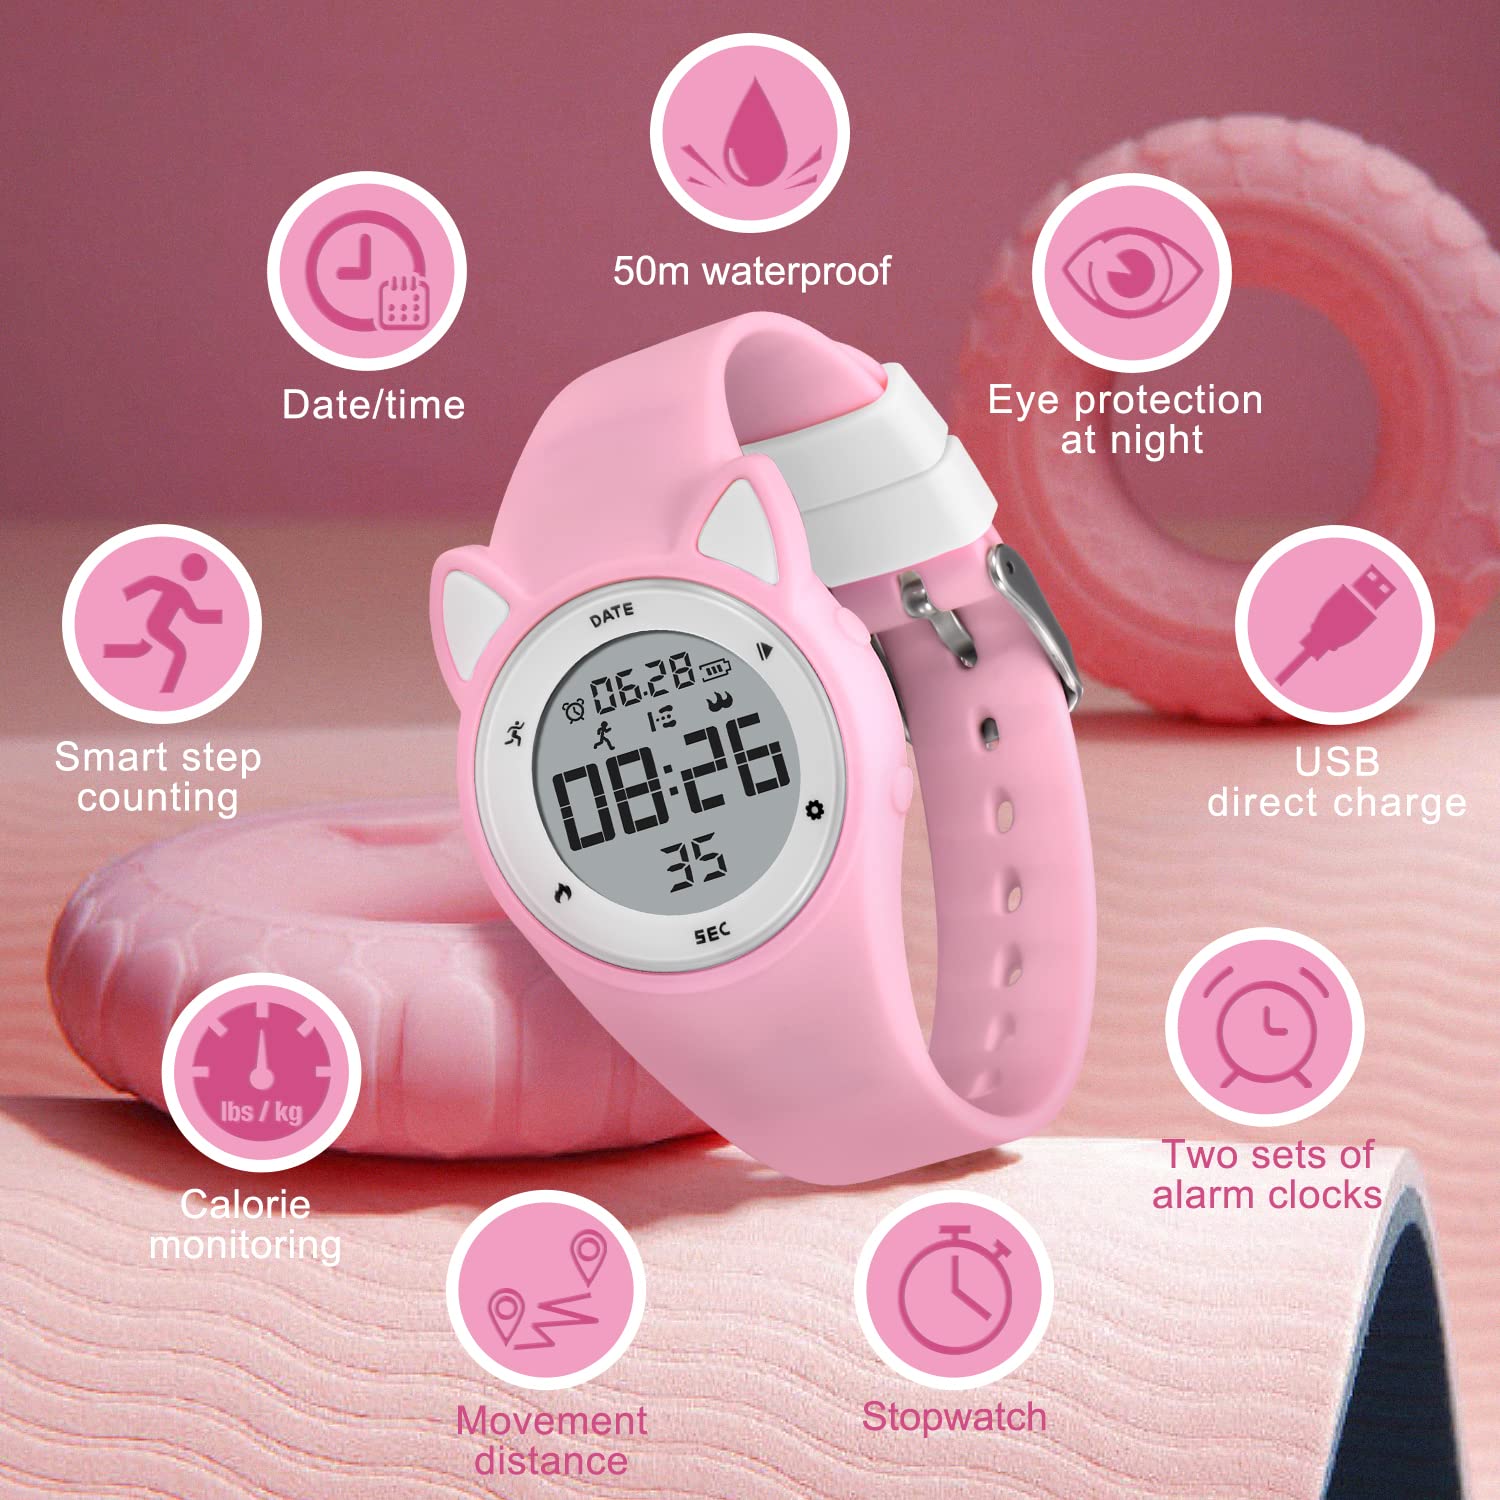 Kids Watches Digital Sport Watch for Girls Boys, Fitness Tracker with Alarm Clock, Stopwatch, No App Waterproof Watches for Teens Students Ages 5-12